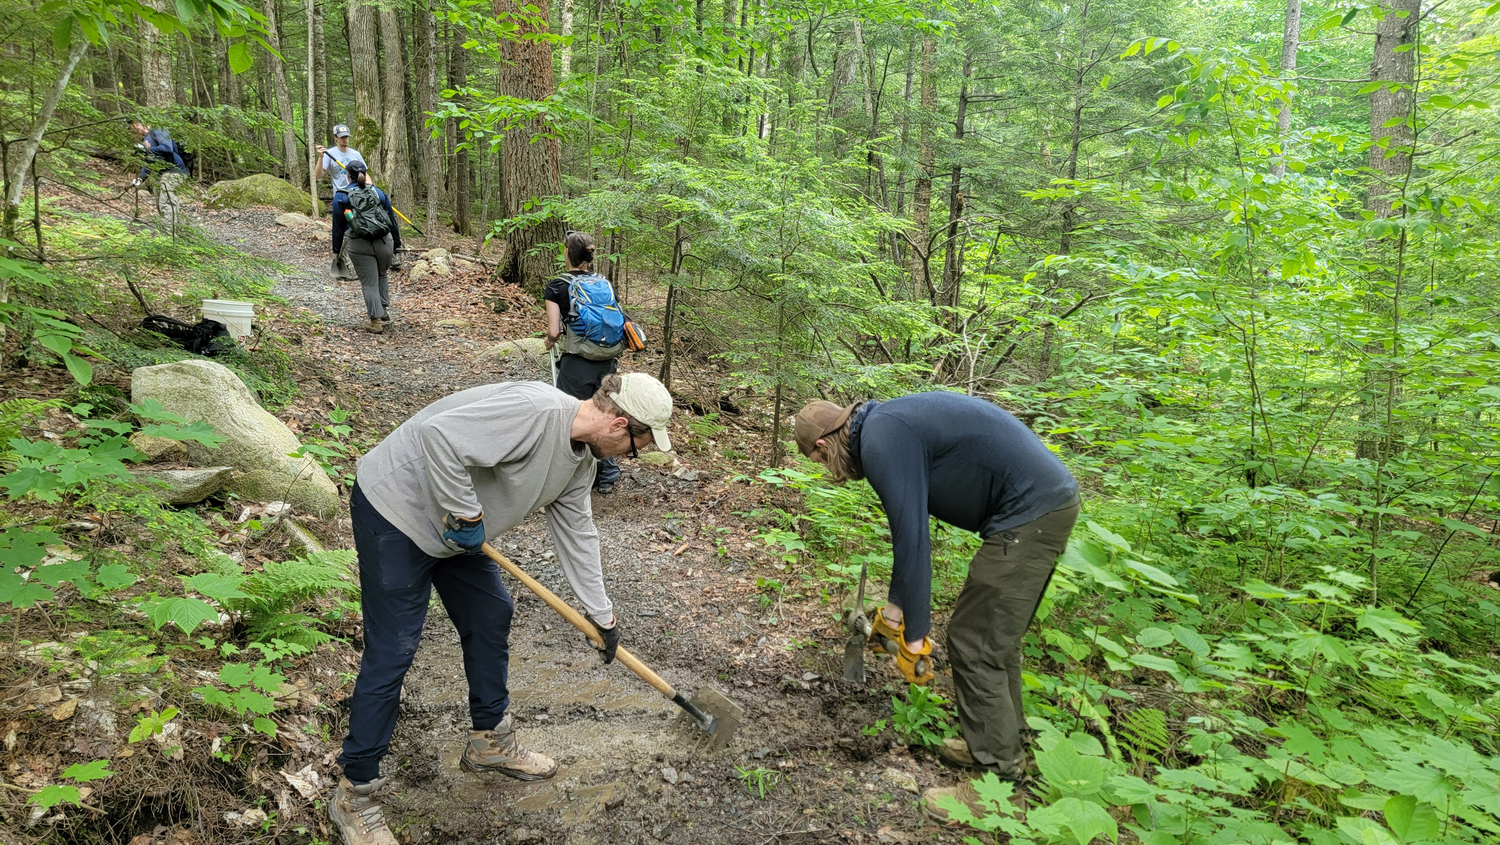 "A crew of 5 young trail builders work to build trails"